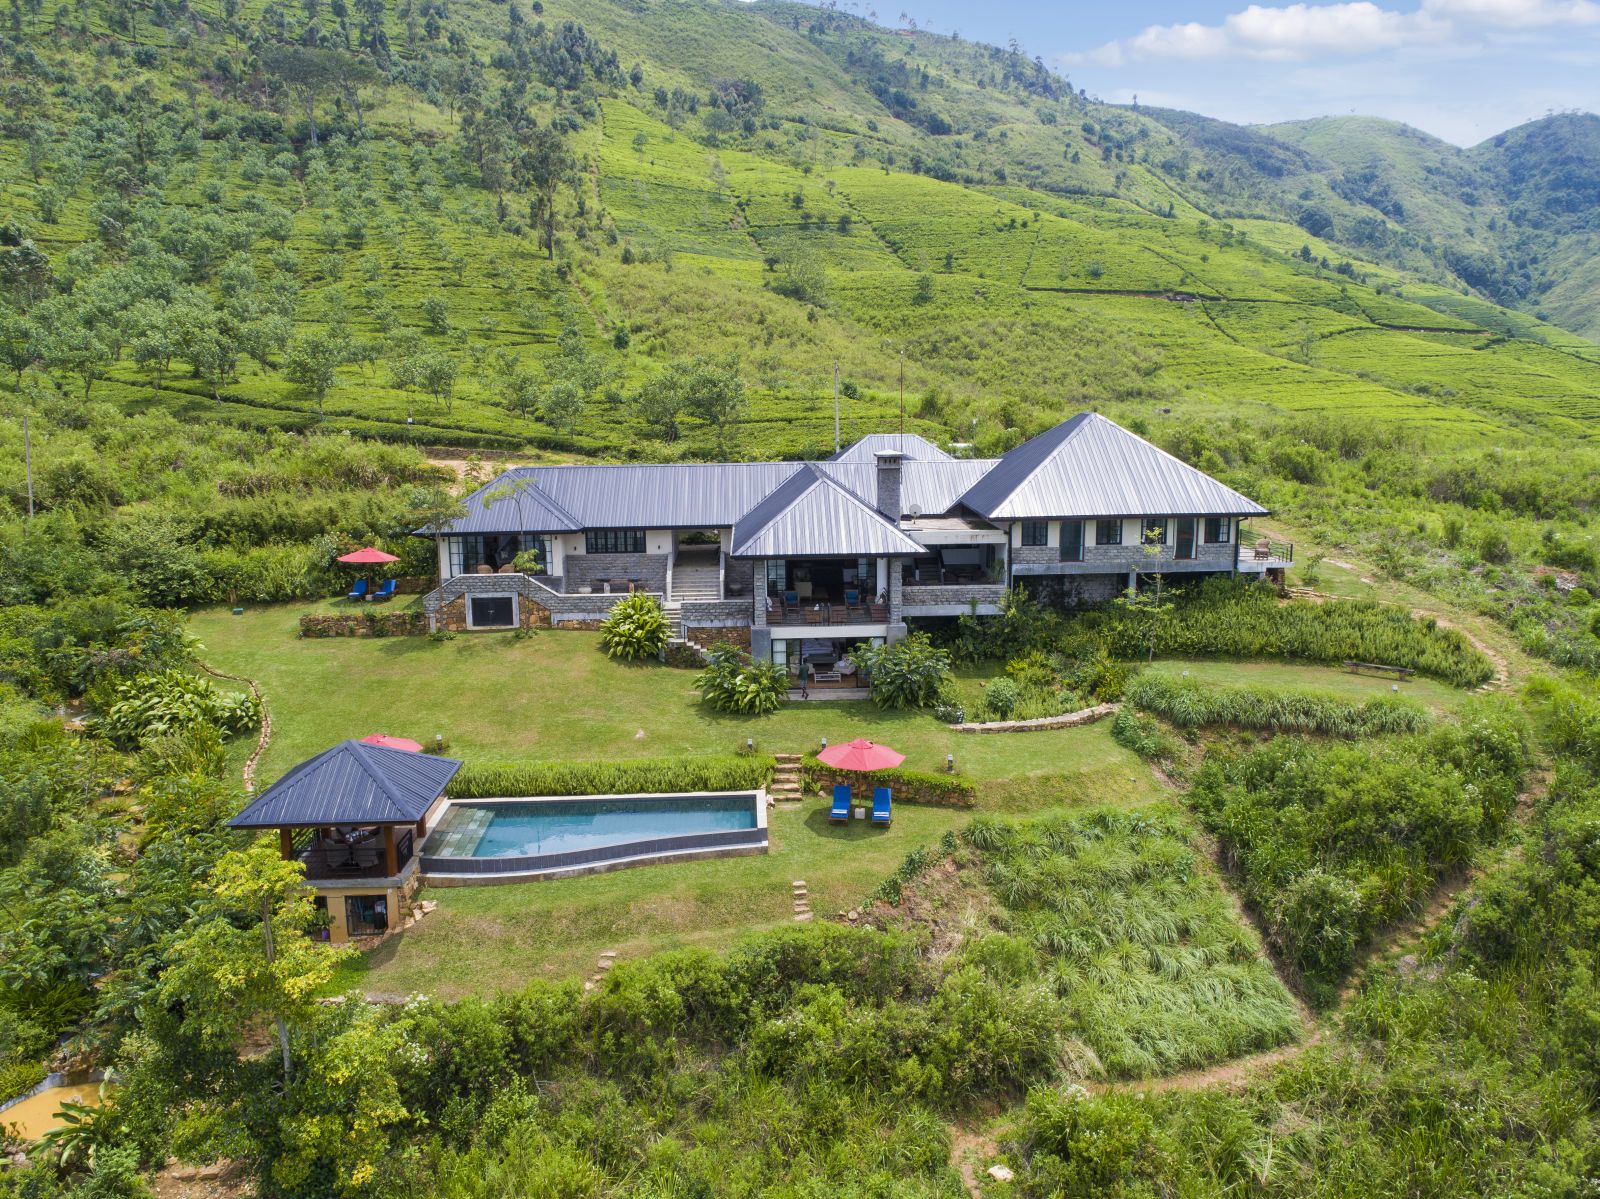 A aerial view of Camelia Hill tea bungalow in Sri Lanka set among tea plantations with mountains in the background